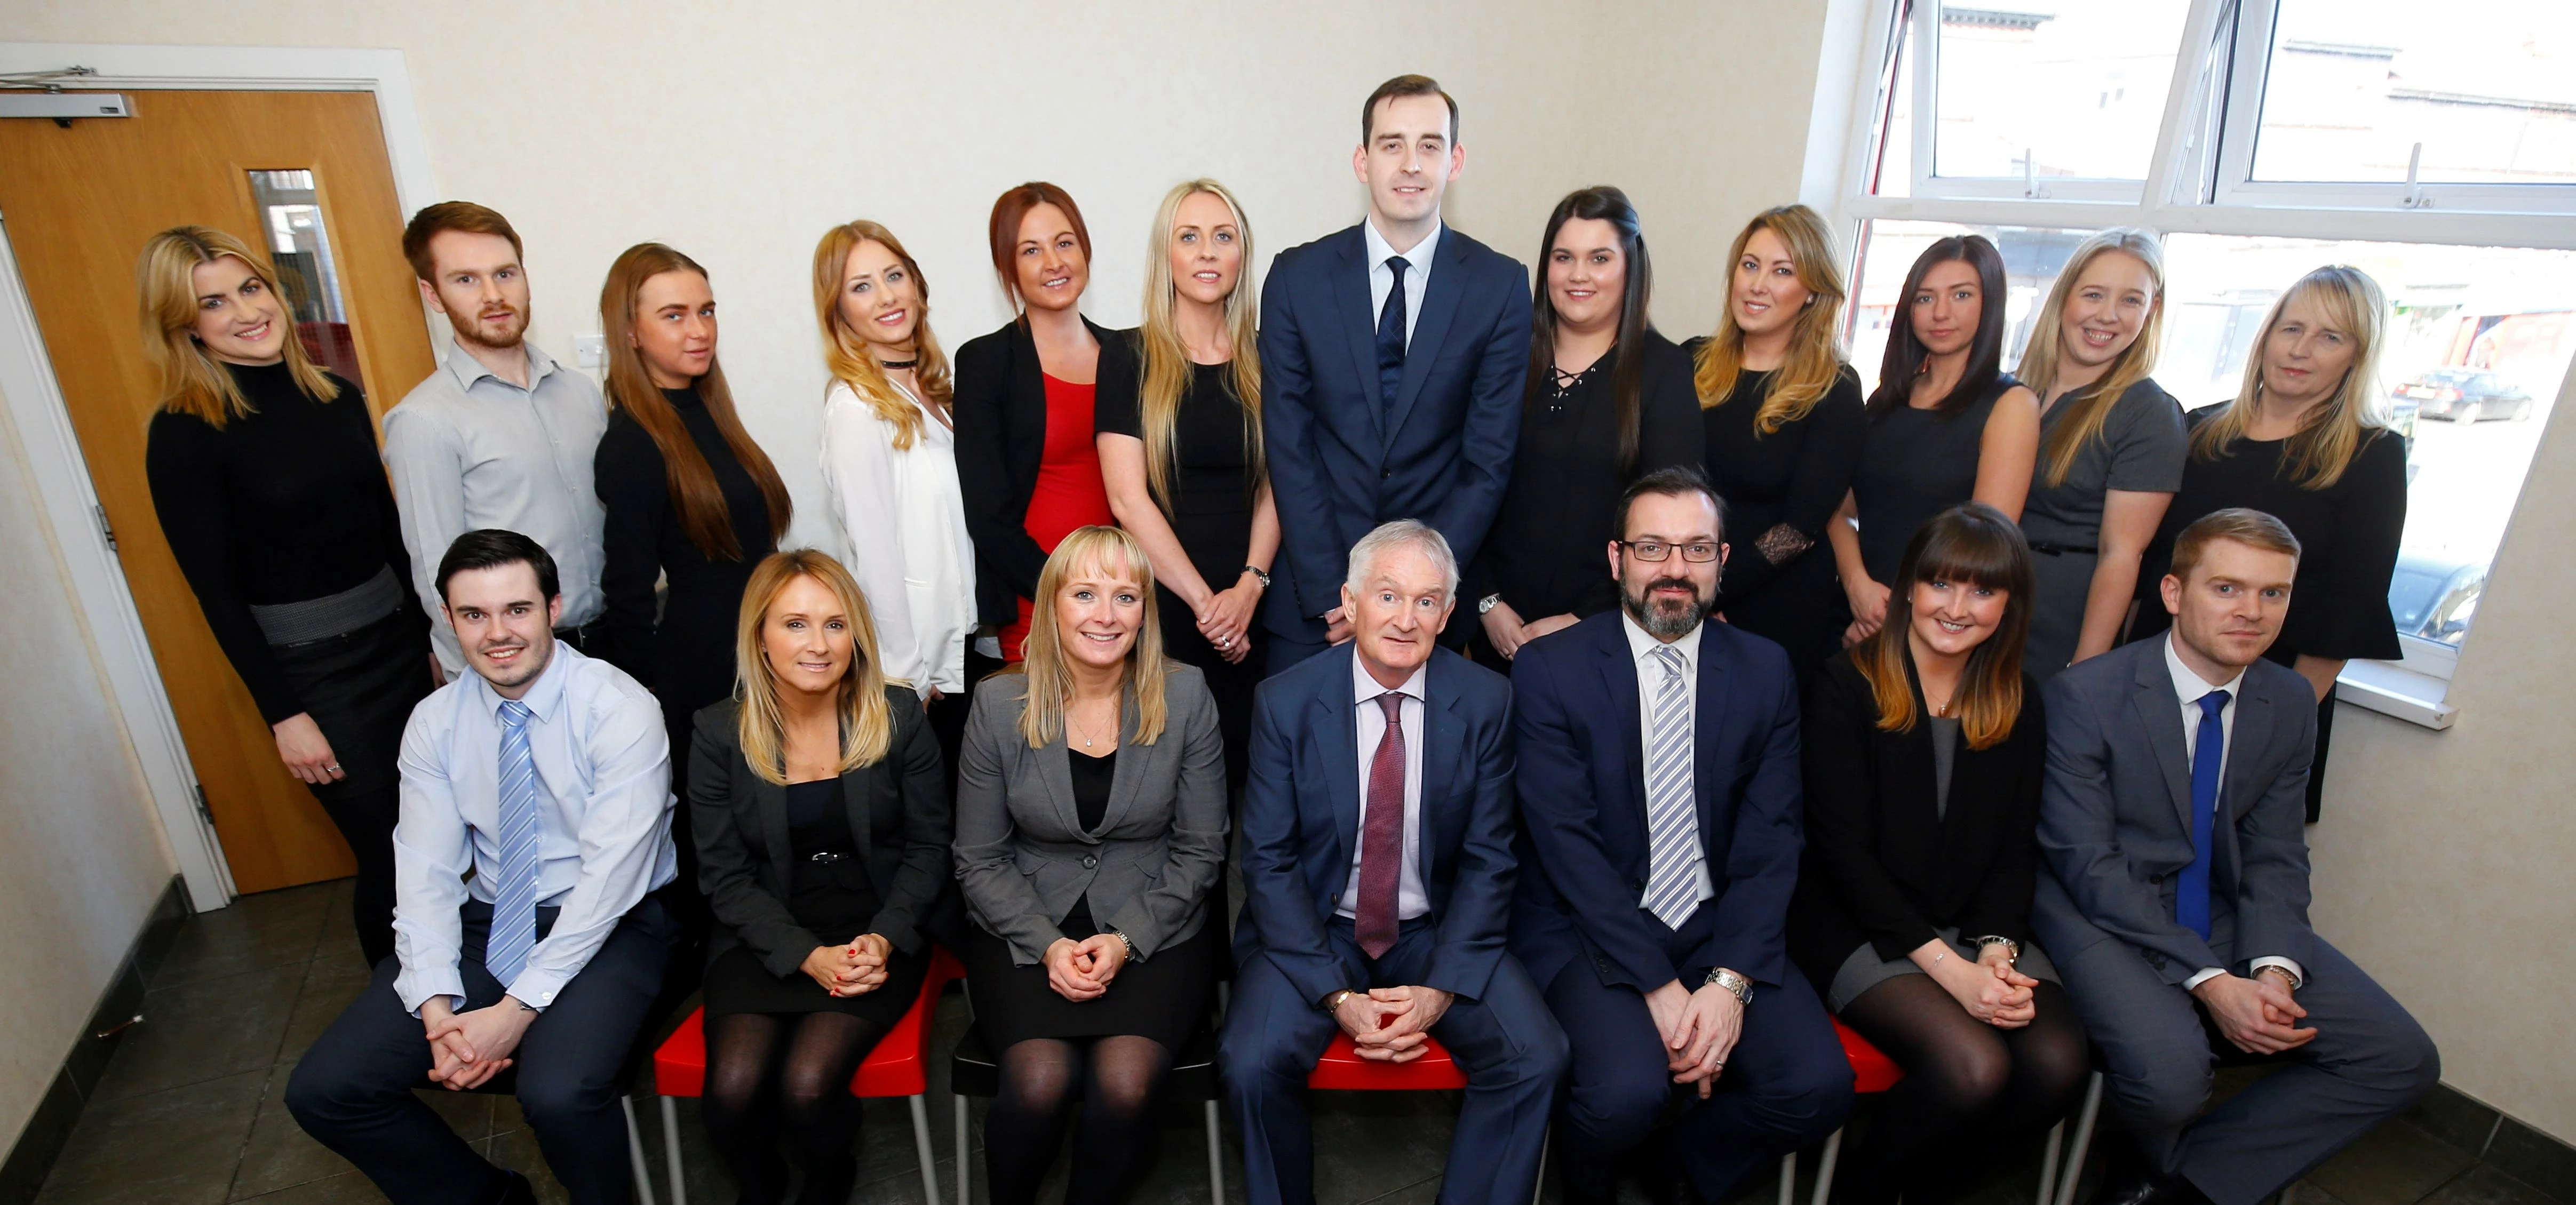 Paul Crowley & Co's new personal injury team